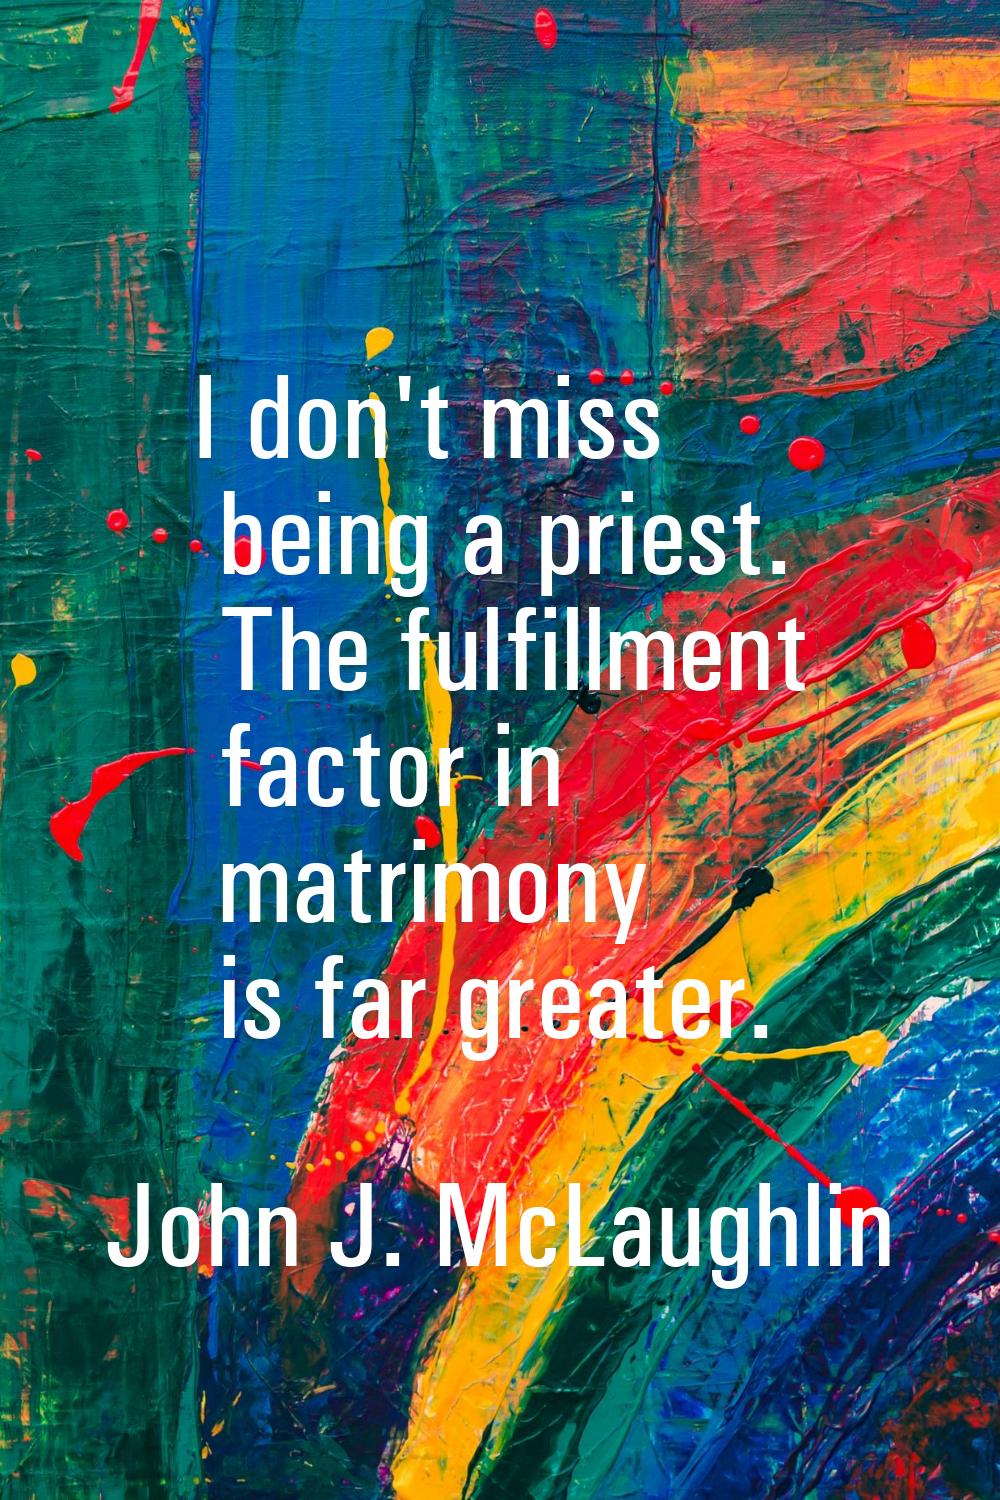 I don't miss being a priest. The fulfillment factor in matrimony is far greater.